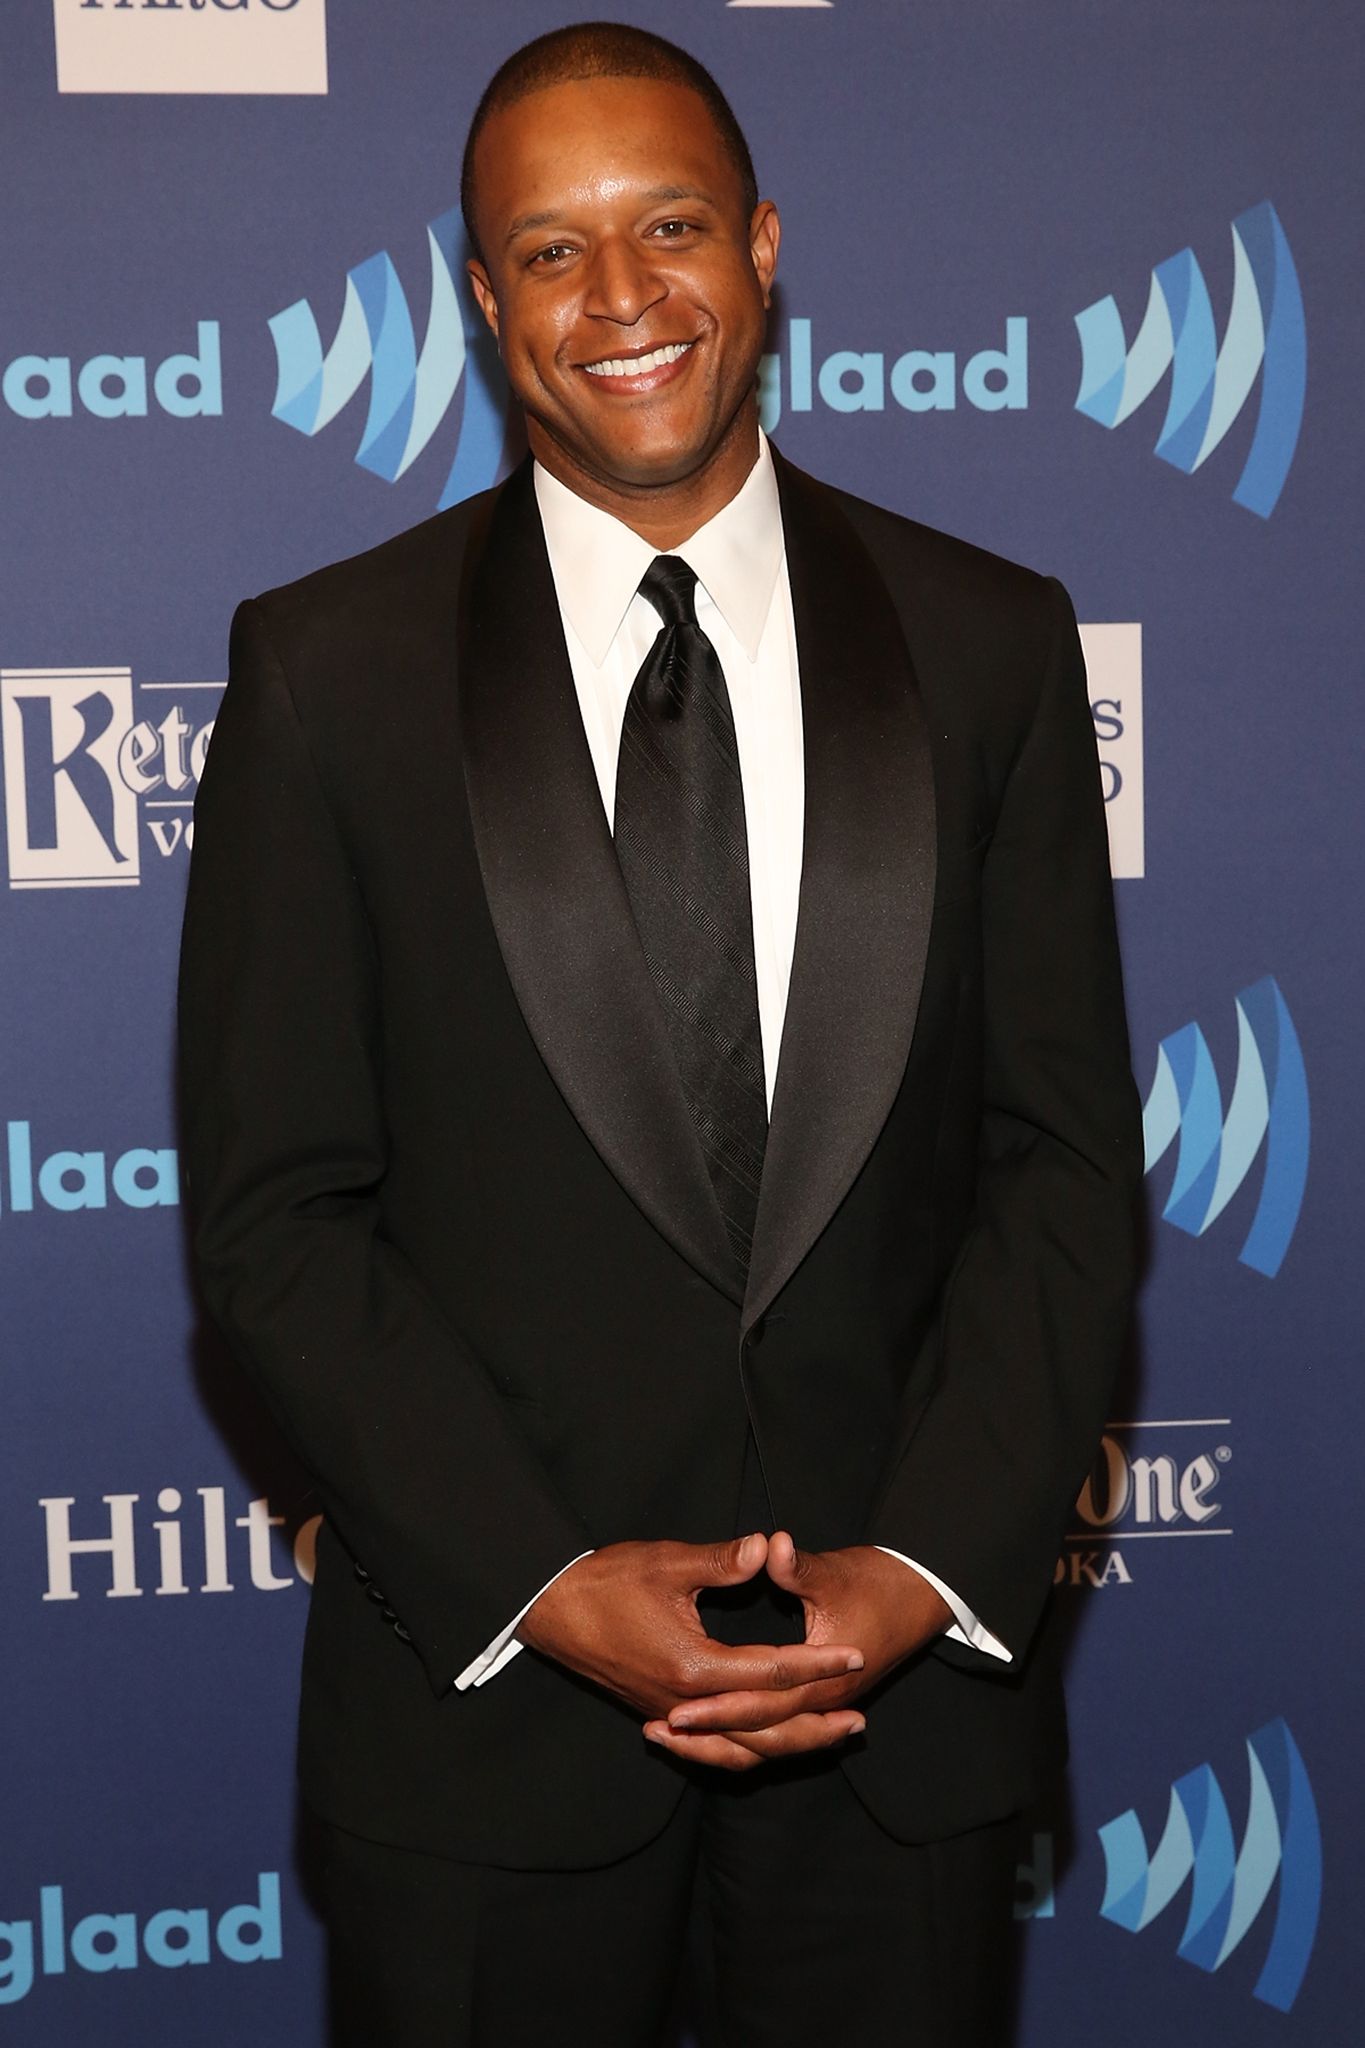 Craig Melvin at the 26th Annual GLAAD Media Awards at The Waldorf Astoria on May 9, 2015 in New York City. | Photo: Getty Images